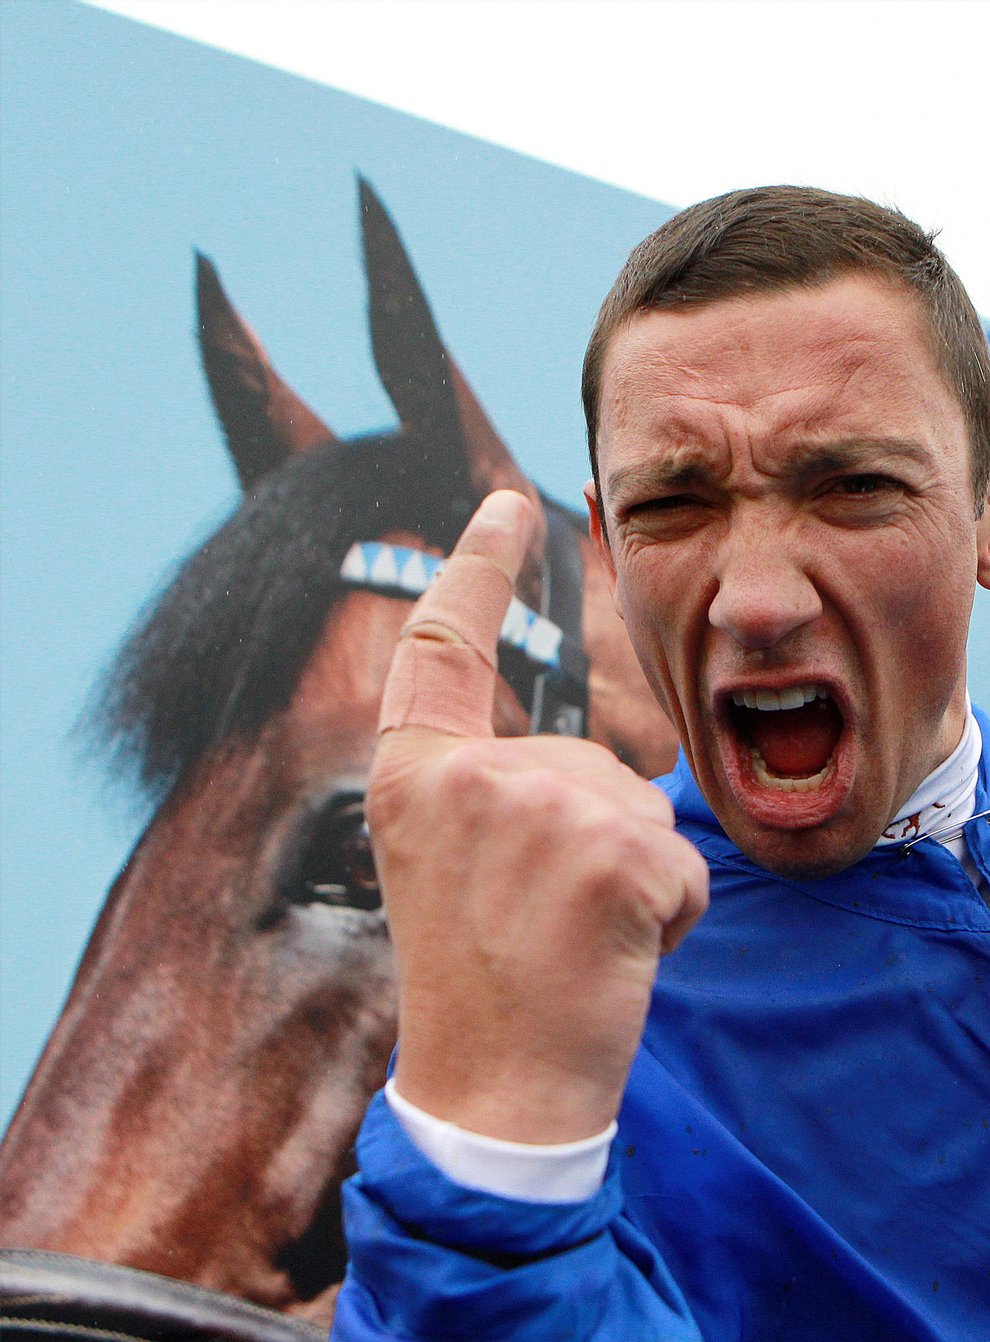 Frankie Dettori is one of the top jockeys signed up for the Racing League